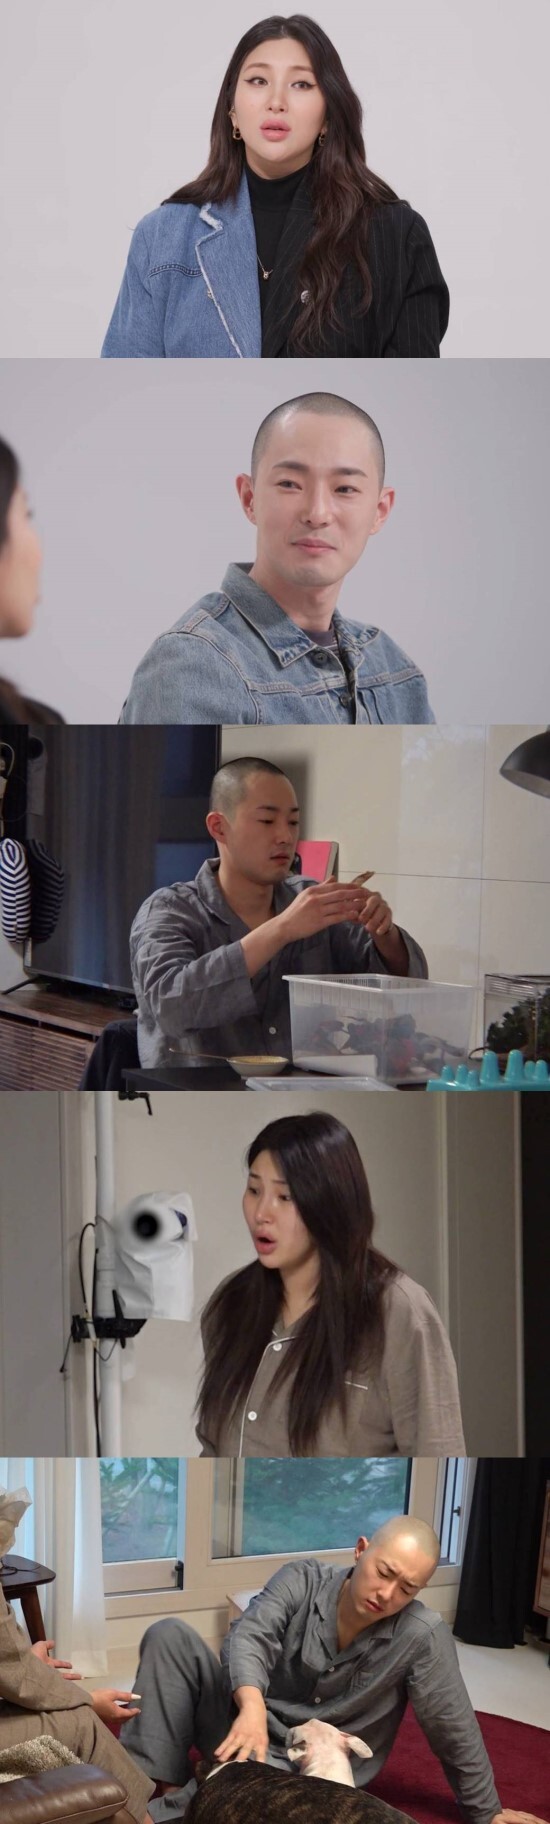 On SBSs Same Bed, Different Dreams 22 - You Are My Destiny (hereinafter referred to as Same Bed, Different Dreams 22), which will be broadcast on the 21st, the daily life of rapper Giant Pink and restaurant businessman Han Dong-hoon, who joined as a new fate couple, will be unveiled for the first time.Rapper Giant Pink, who has been attracting attention as a monster in the hip-hop audition program Show Mid Money and Unfreety Rap Star, is the first to unveil his marriage life with his 1-year-old son and Hunan husband Han Dong-hoon.The two men, who met on a blind date and became a couple in 2020, are expecting a honeymoon like a best friend.But the sweetness of the honeymoon also surprised everyone for a while, saying that Giant Pink was living in various places in a year of marriage.Same Bed, Different Dreams 22 The youngest fateful couples breathtaking ice sheet (?) attracts attention to what everyday life will be like.In addition, the unique taste of Giant Pink husband Han Dong-hoon was revealed.It was her husband Self shaved hair and love of her pet reptile. Giant Pink, who watched her busy husband from morning, made the studio into a laughing sea with cute jealousy saying, Take care of me like that.Meanwhile, the anger of husband Han Dong-hoon exploded at Giant Pinks nagging: the Giant Pinks, who showed the newlyweds in Al-Kondalkong, were the couple.Giant Pink, who helped her husband who had been early to work, started to nag like a mother.Han Dong-hoon, who did not get annoyed, eventually exploded and said, My mother does not do like you!I wonder what happened to the two people.In the meantime, Giant Pink, who entered the 8-month pregnancy, was released as a preacher with his own rap.Giant Pink, who preached with hip-hop rather than classical, showed the winners ability to win the season 3 of Unfreety Rap Star and completed rap making on the spot. In the studio that watched it, he praised it as exciting, lap is good and it is perfect for encouraging childbirth.The youngest fateful couple, Giant Pink and Han Dong-hoon, will be unveiled at Same Bed, Different Dreams 22 - You Are My Destiny, which will be broadcast at 11 pm on the 21st.Photo: SBS Same Bed, Different Dreams 22 - You Are My Destiny